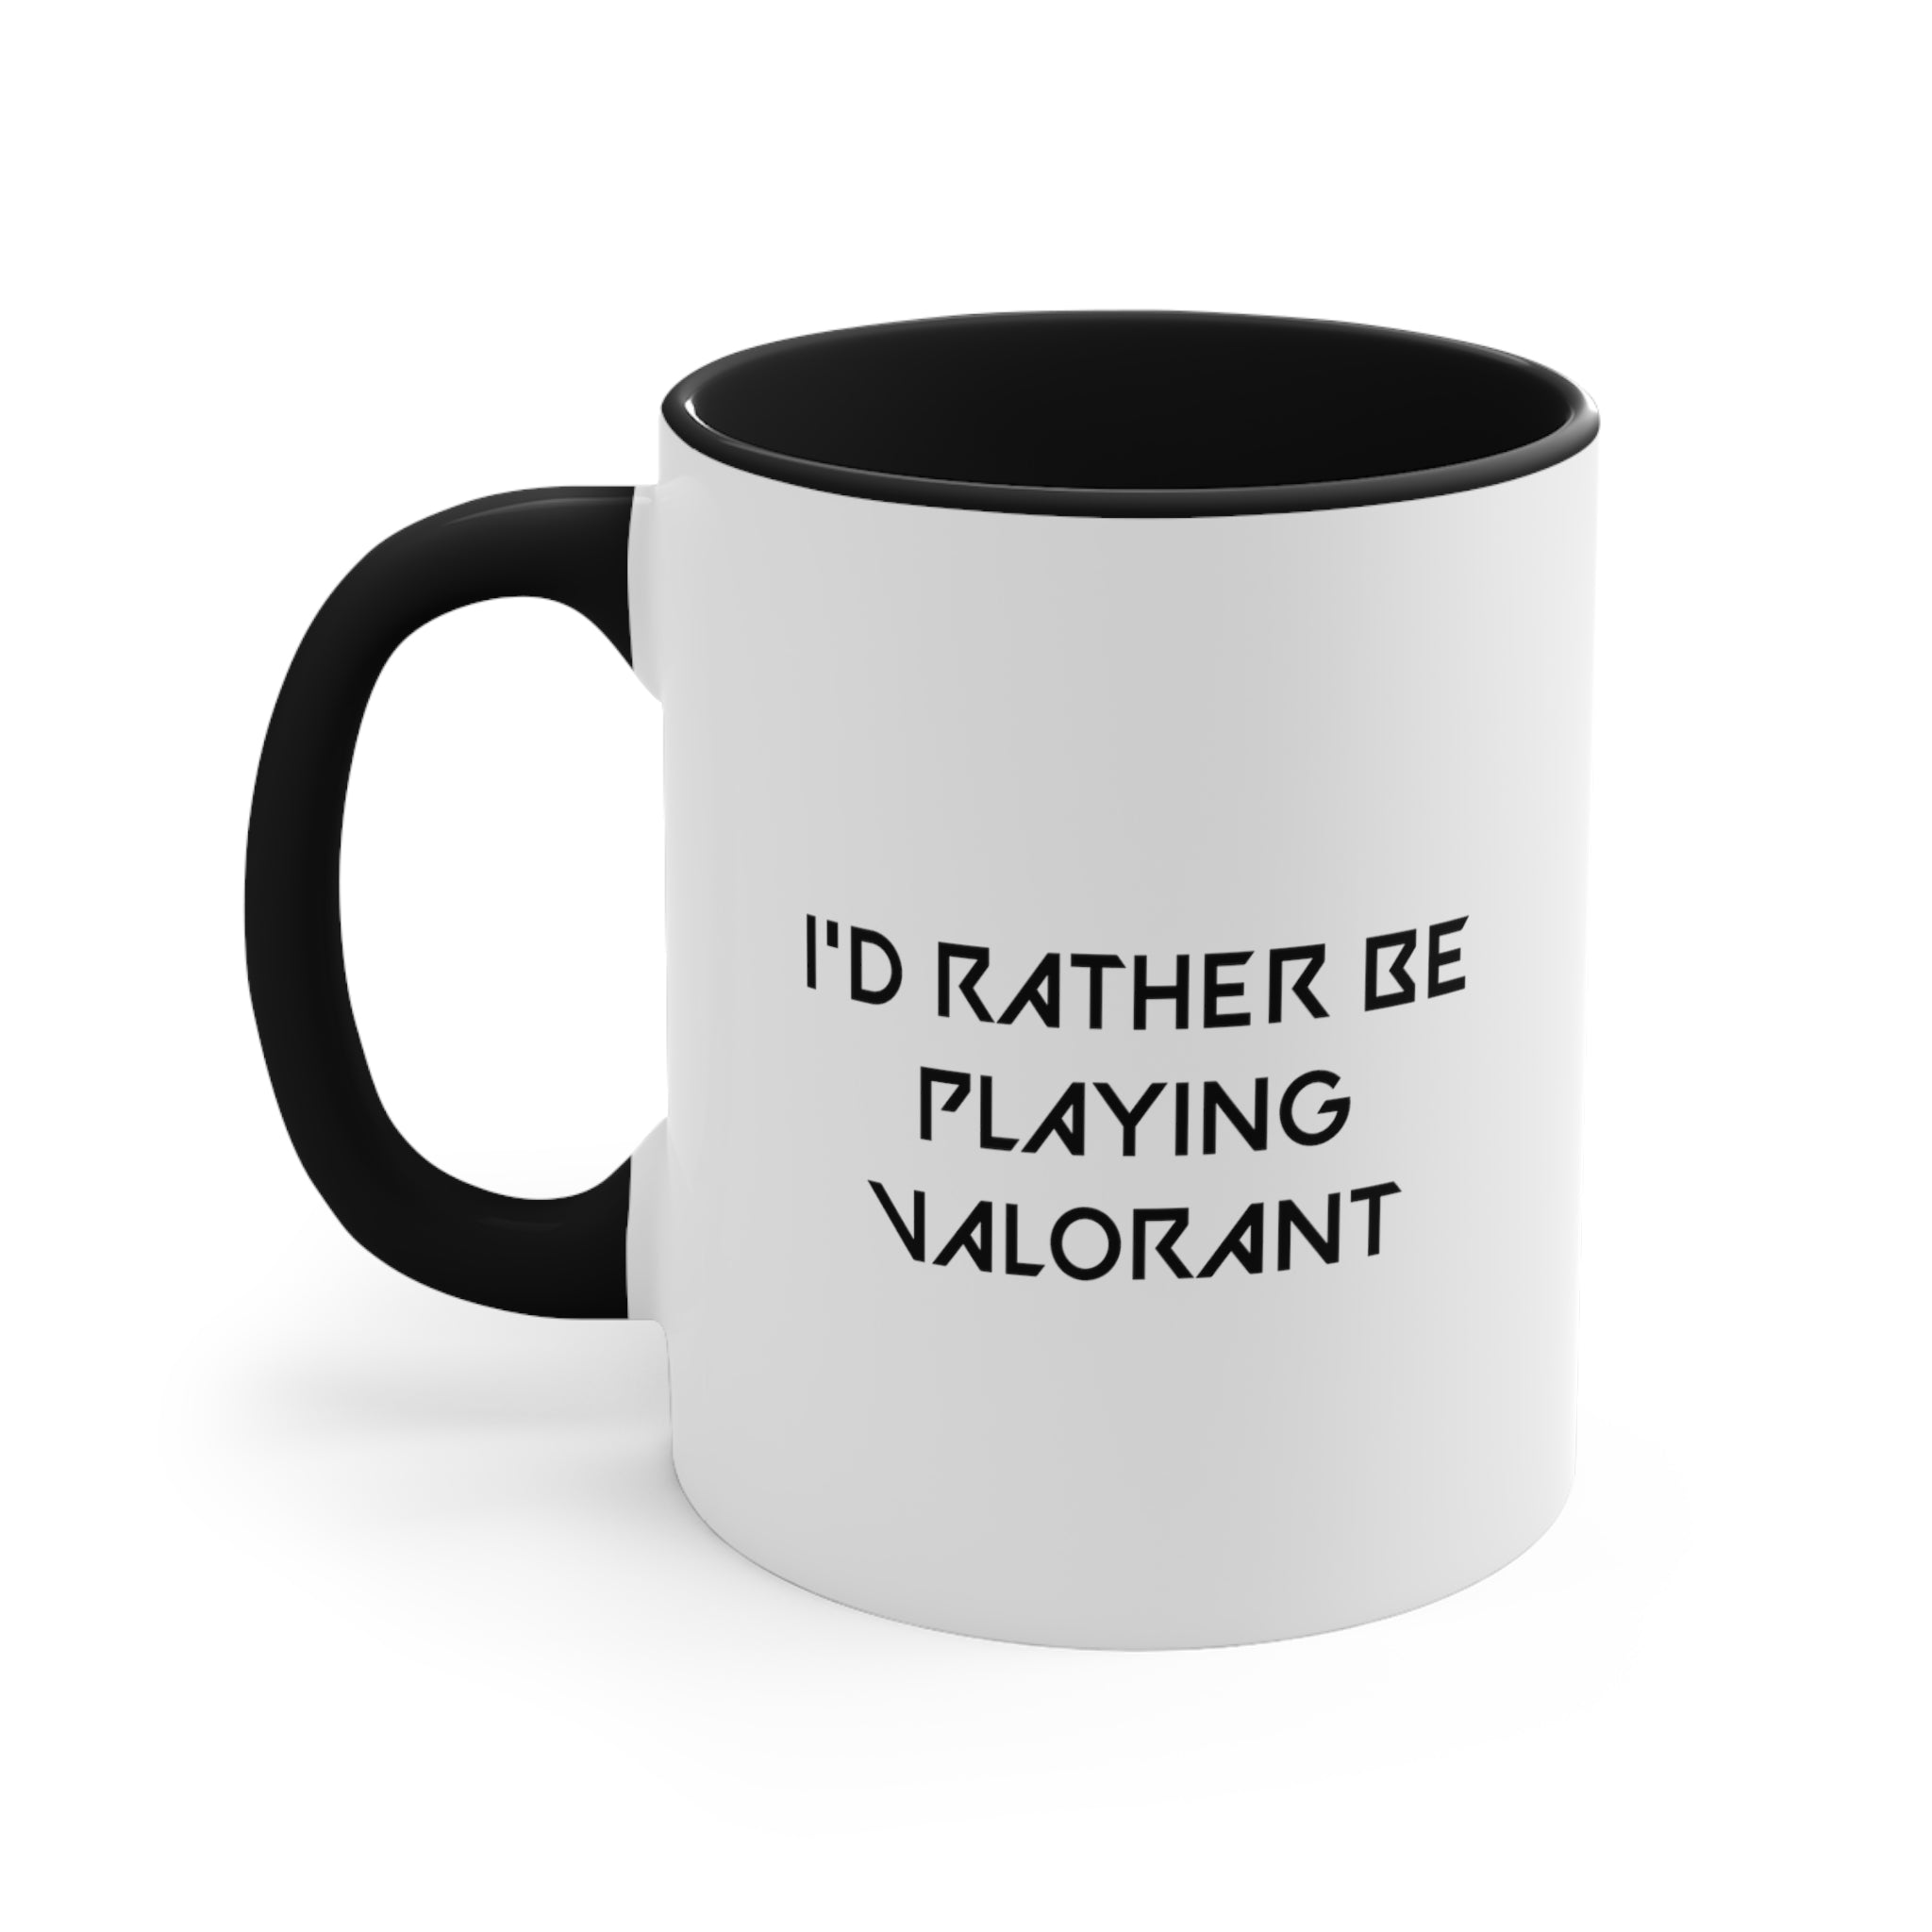 Valorant I'd Rather Be Playing Coffee Mug, 11oz Mugs Cups Gamer Gift For Him Her Game Cup Cups Mugs Birthday Christmas Valentine's Anniversary Gifts